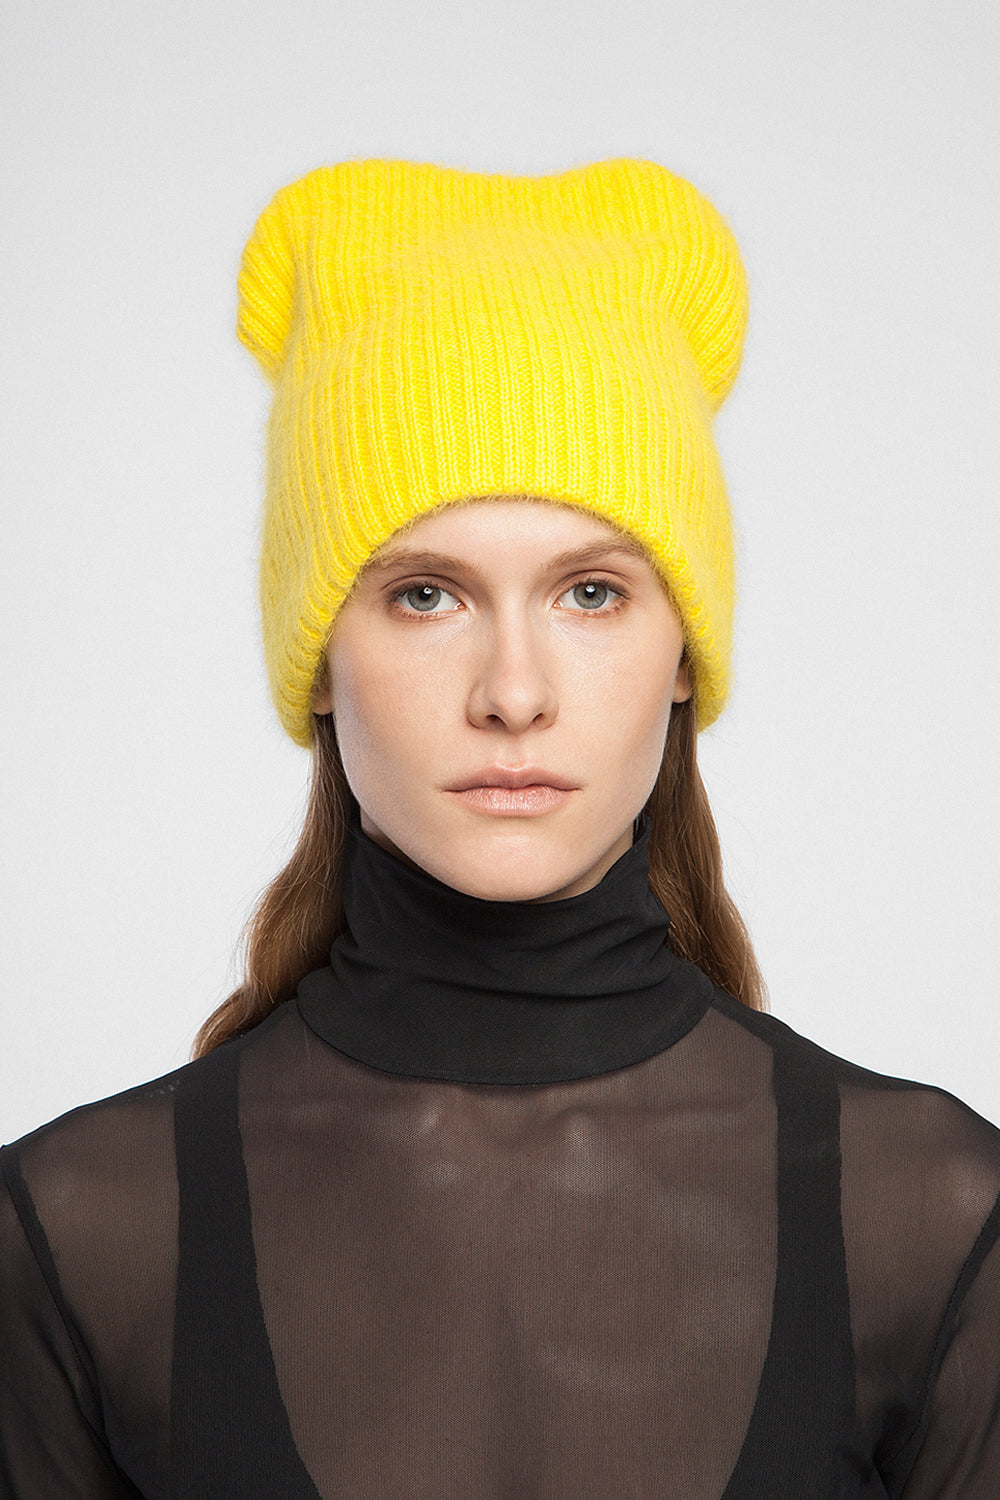 SUNNY YELLOW HIGH TOP KNITTED BEANIE HAT